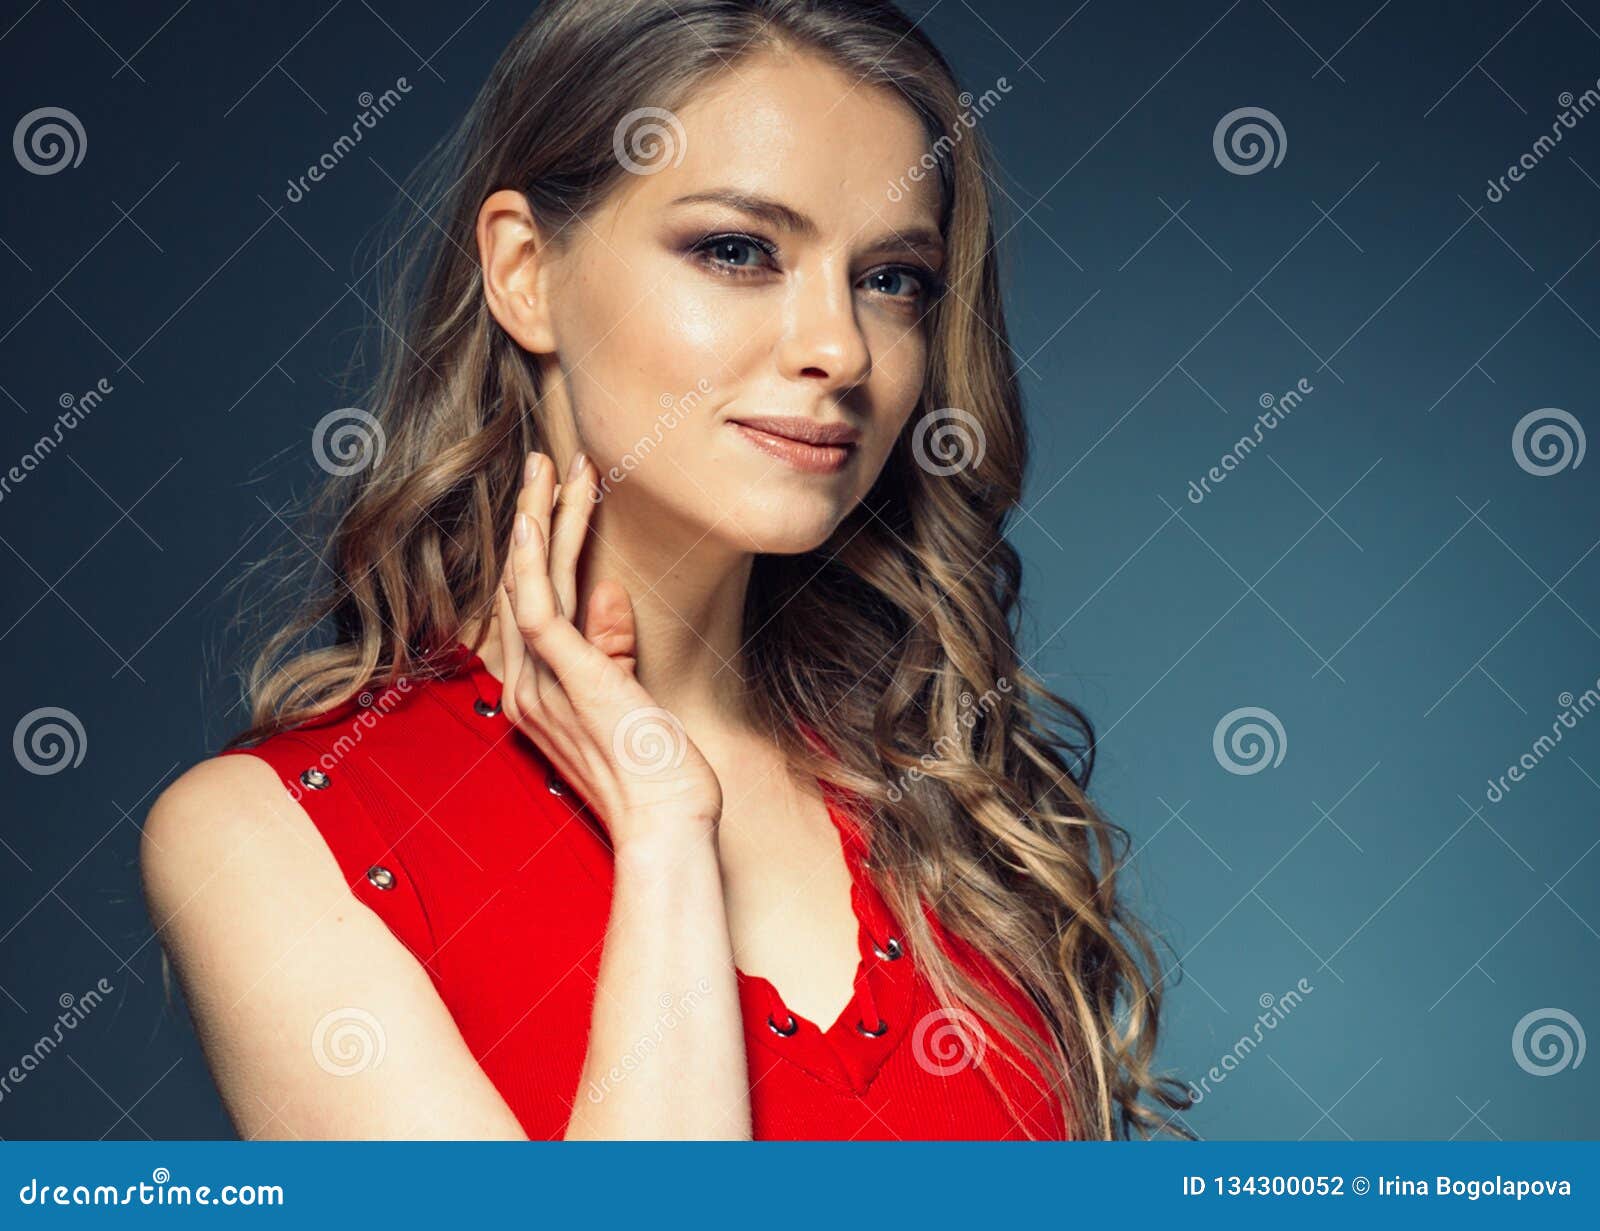 Woman in Red Dress with Long Blonde Hair Stock Photo - Image of curly ...